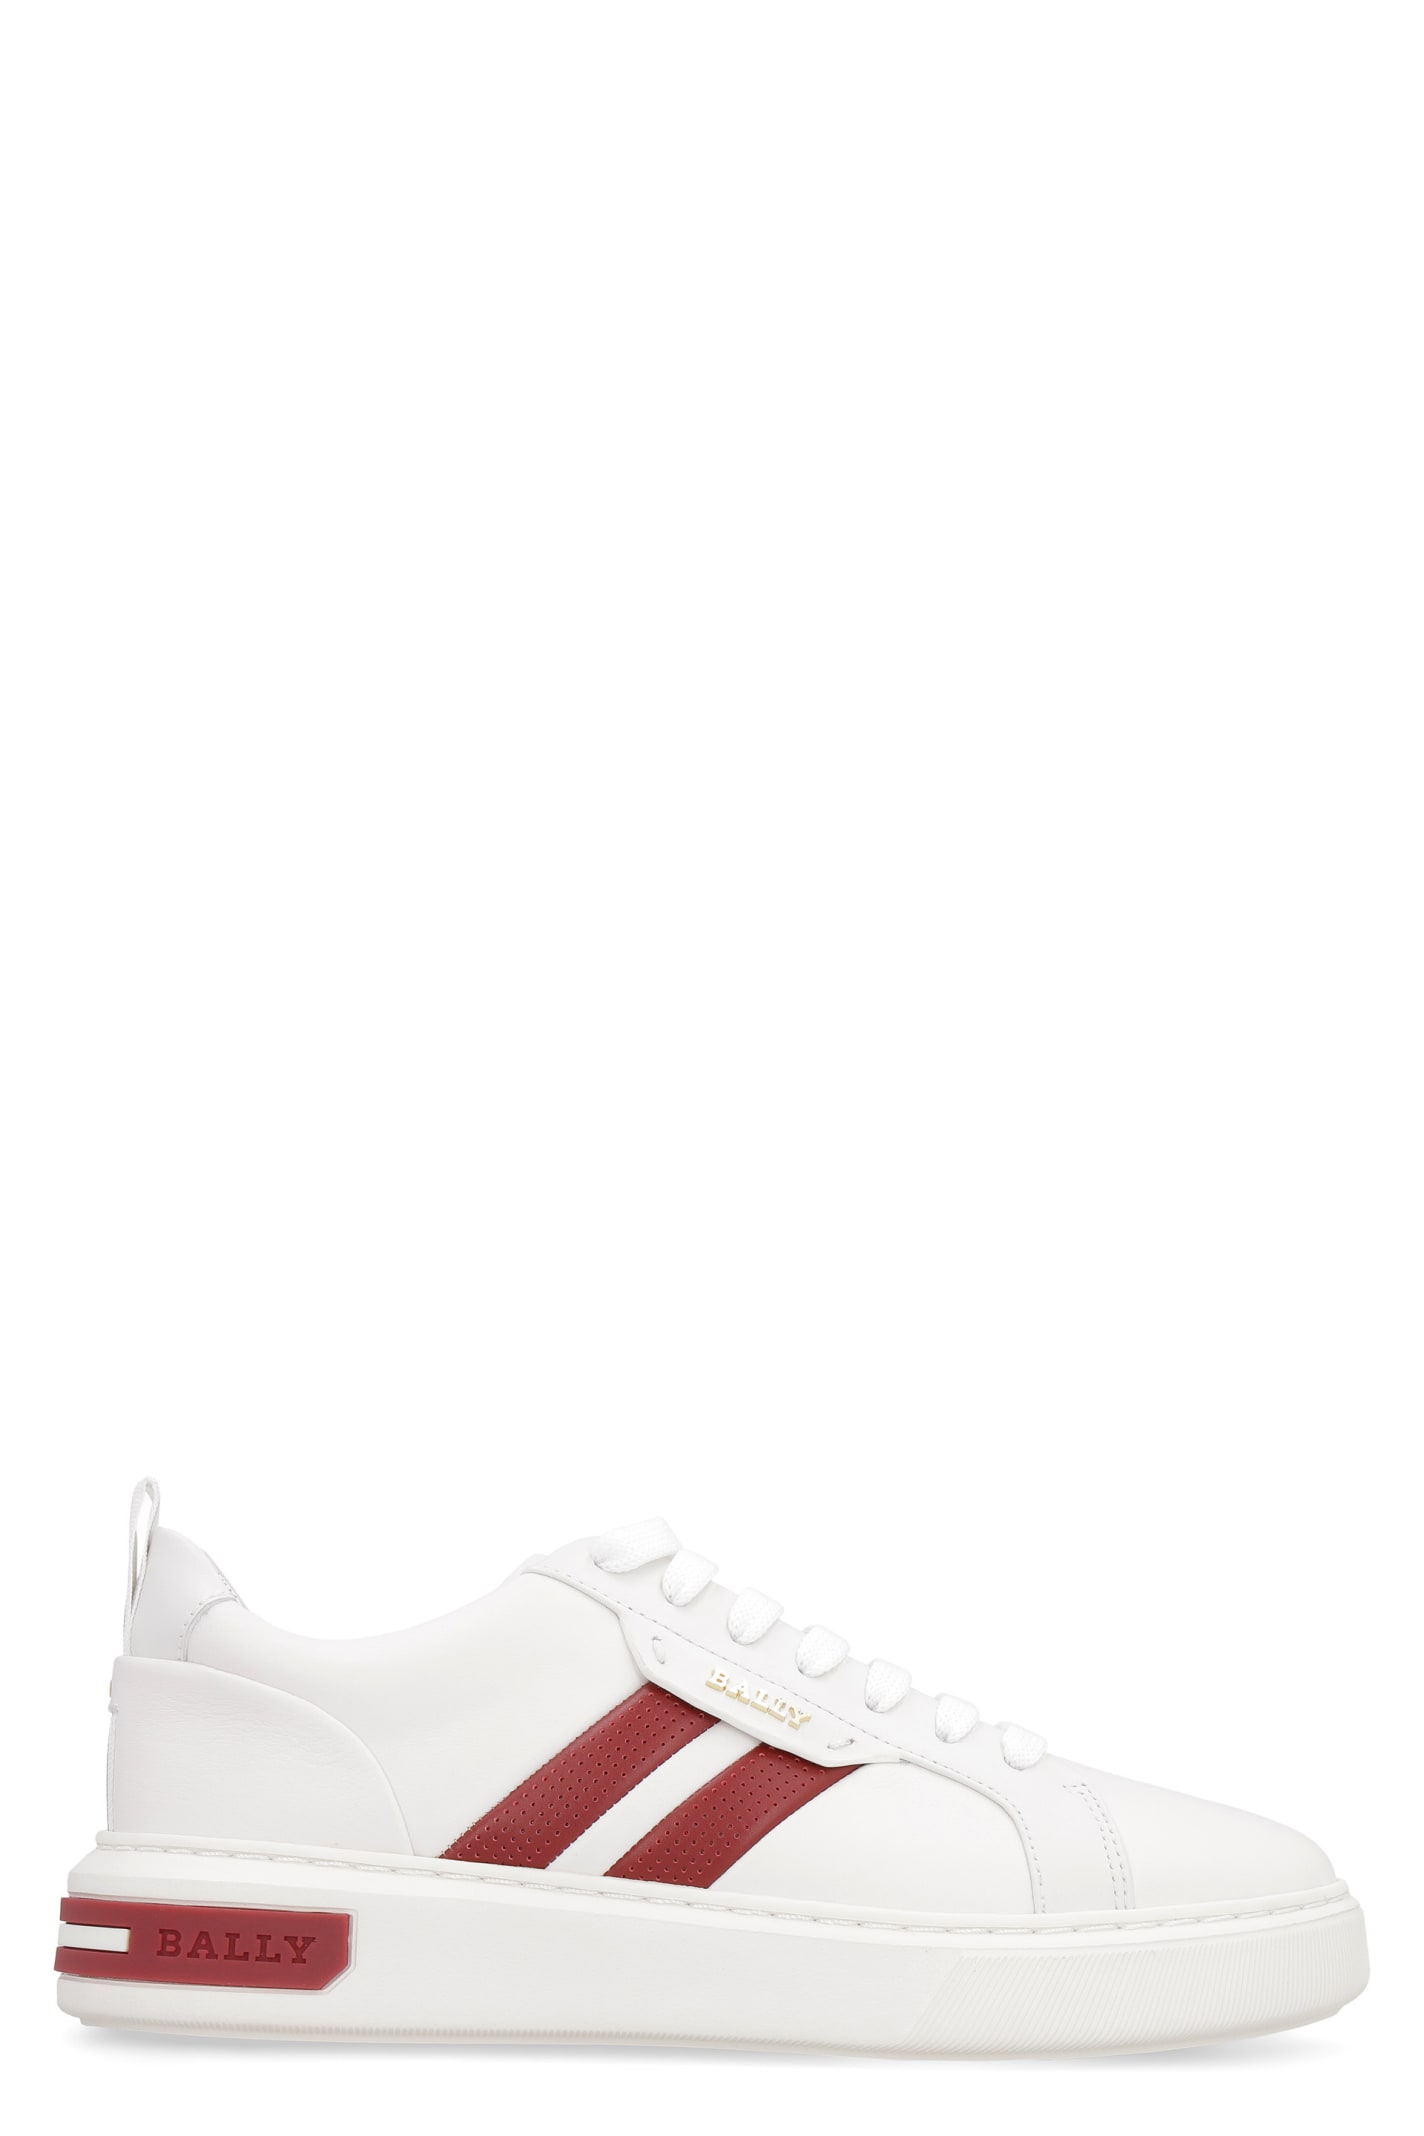 Bally Maxim Leather Low-top Sneakers